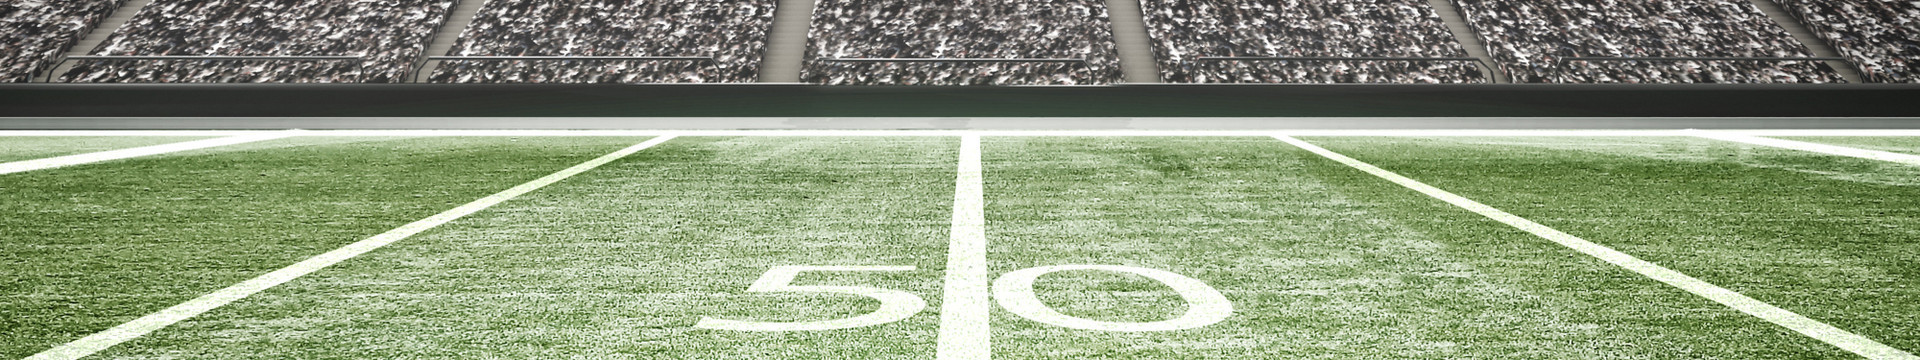 50 Yard Line - Football Central Vacation Packages | Westgate Sports & Entertainment